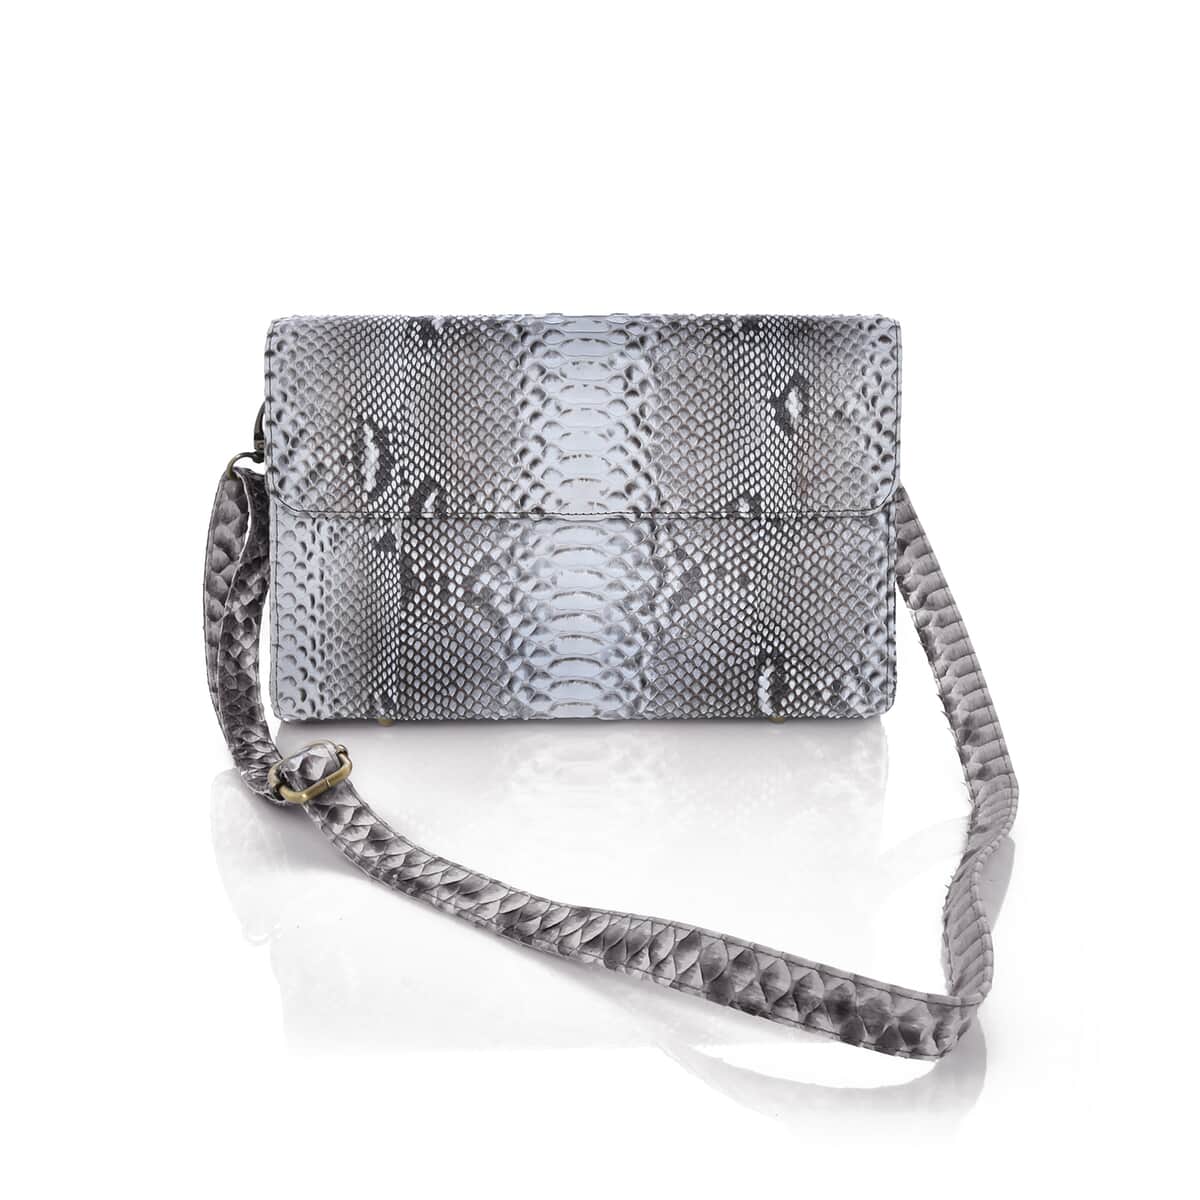 The Pelle Collection Natural Python Leather Evening Clutch Bag with Detachable Strap, Clutches for Women, Leather Handbag, Clutch Purse image number 4